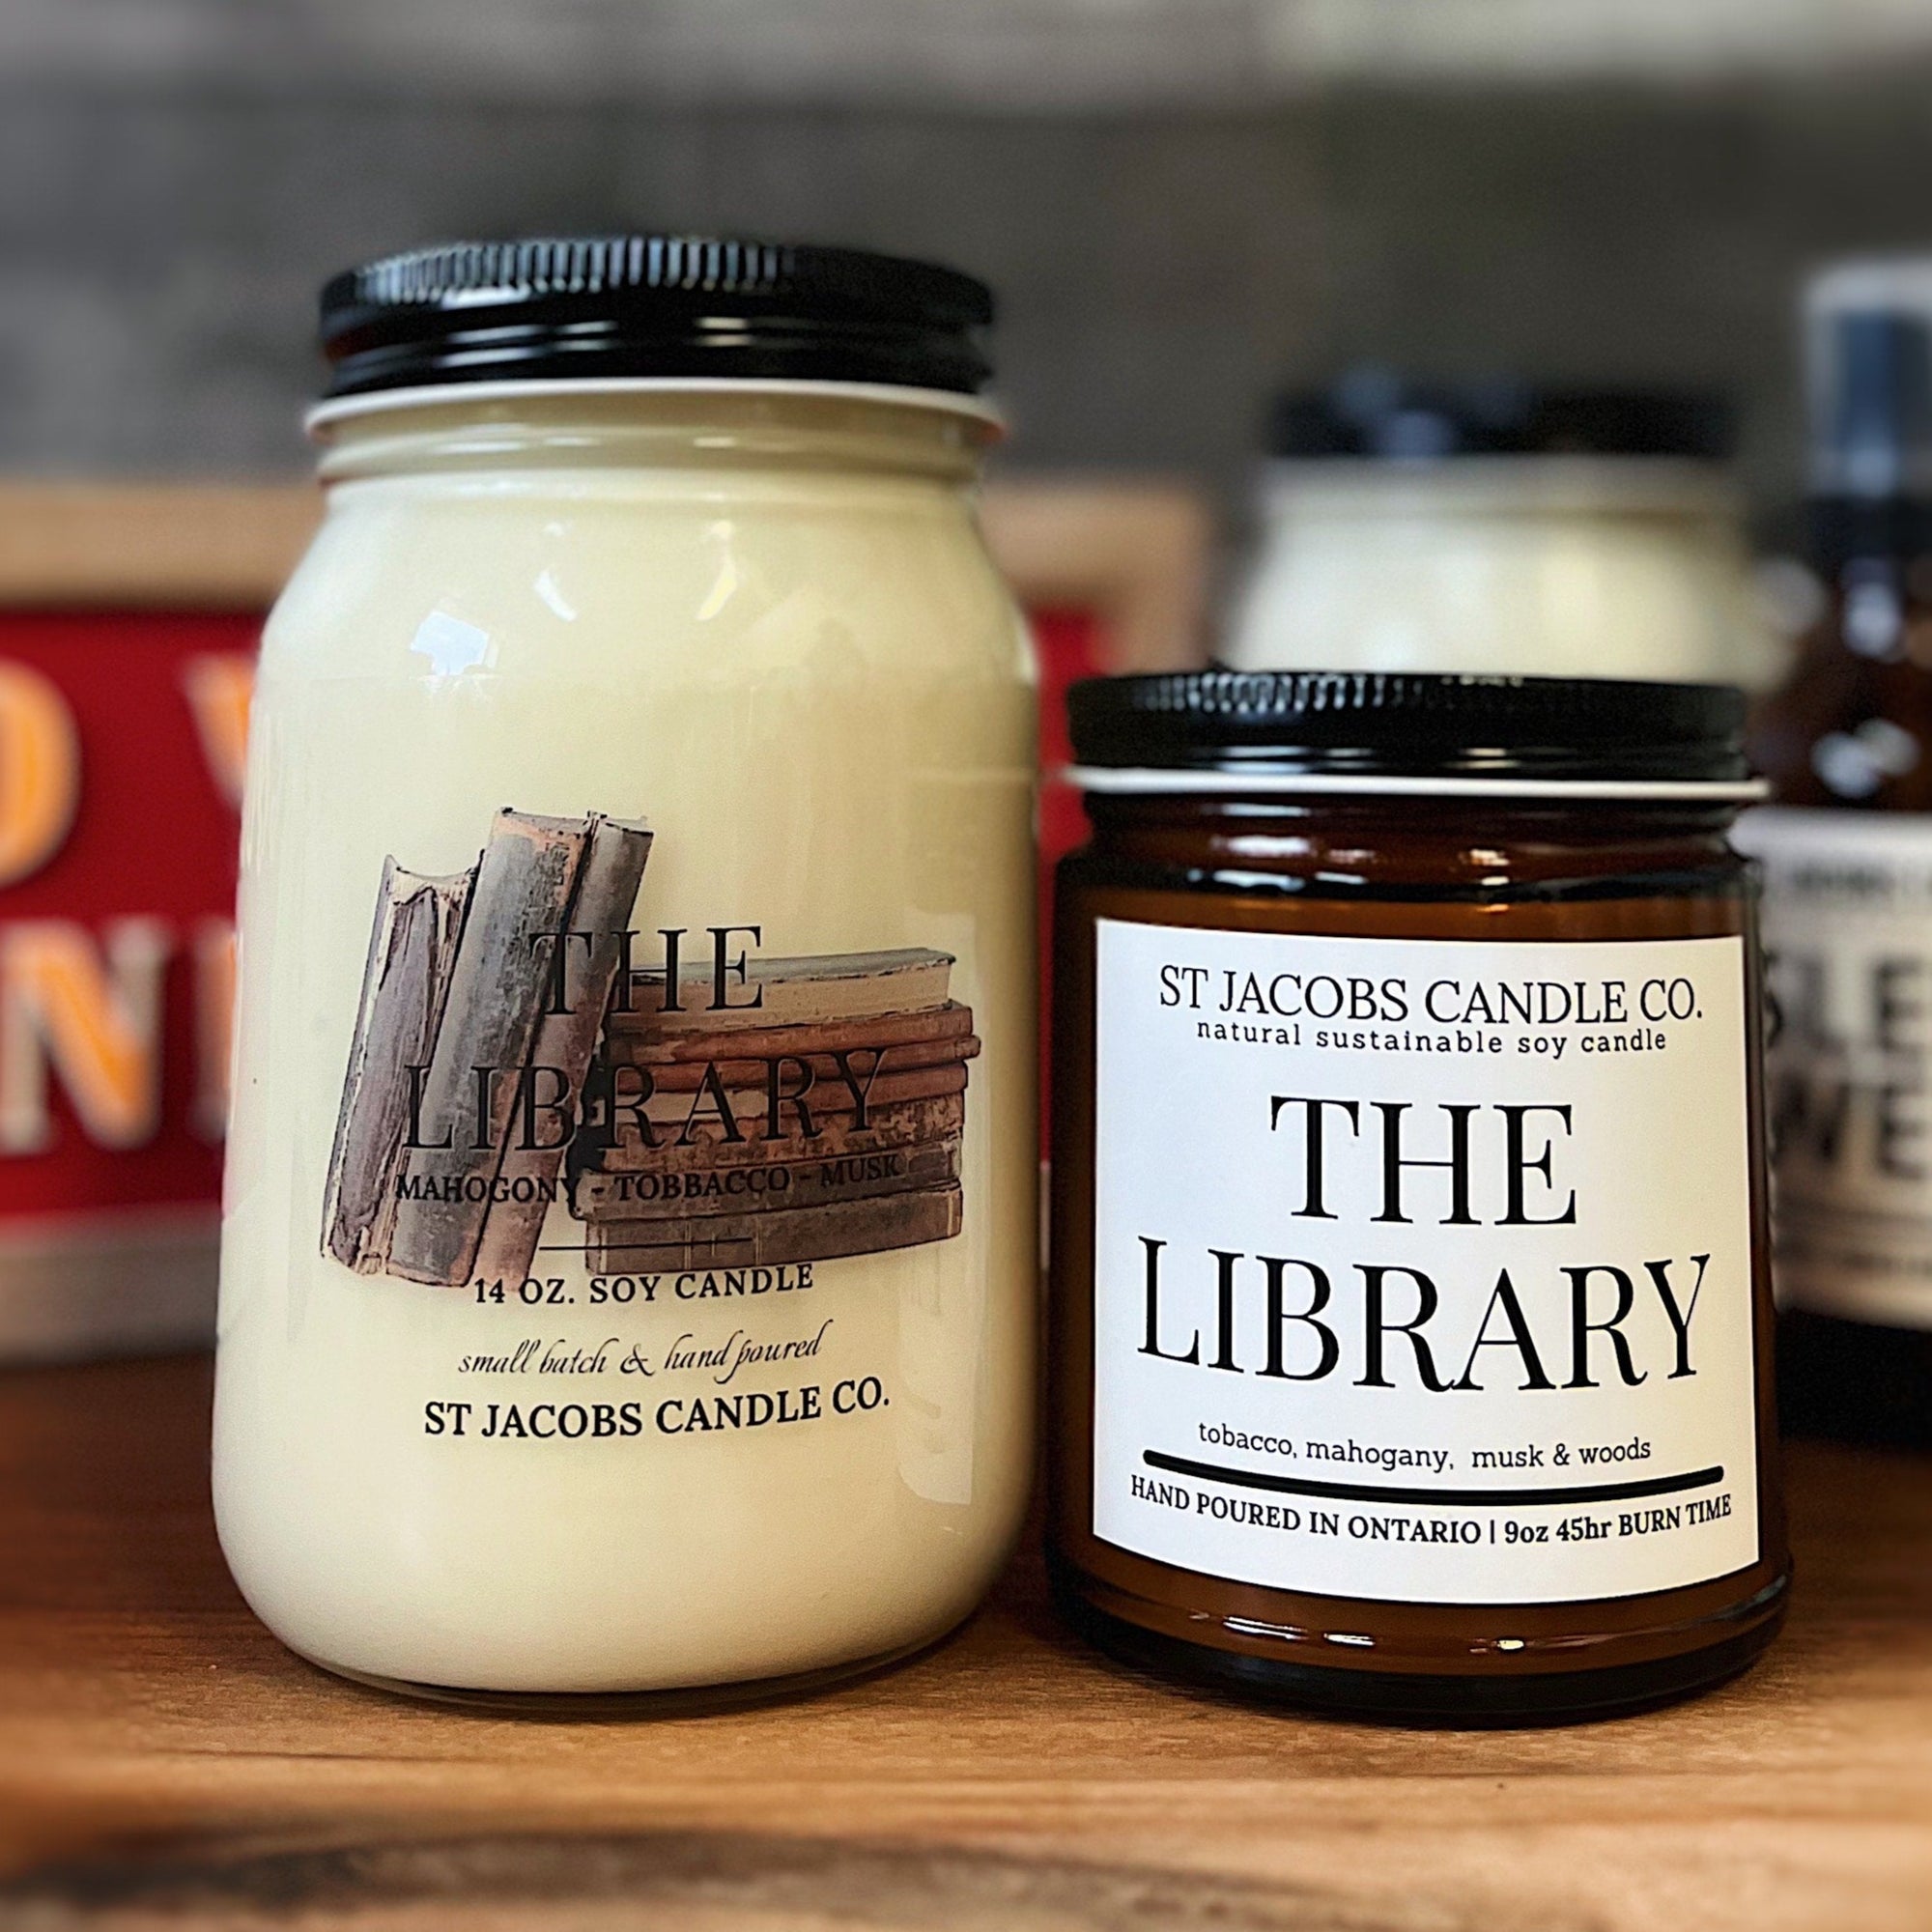 "THE LIBRARY" Natural Soy Wax Candle